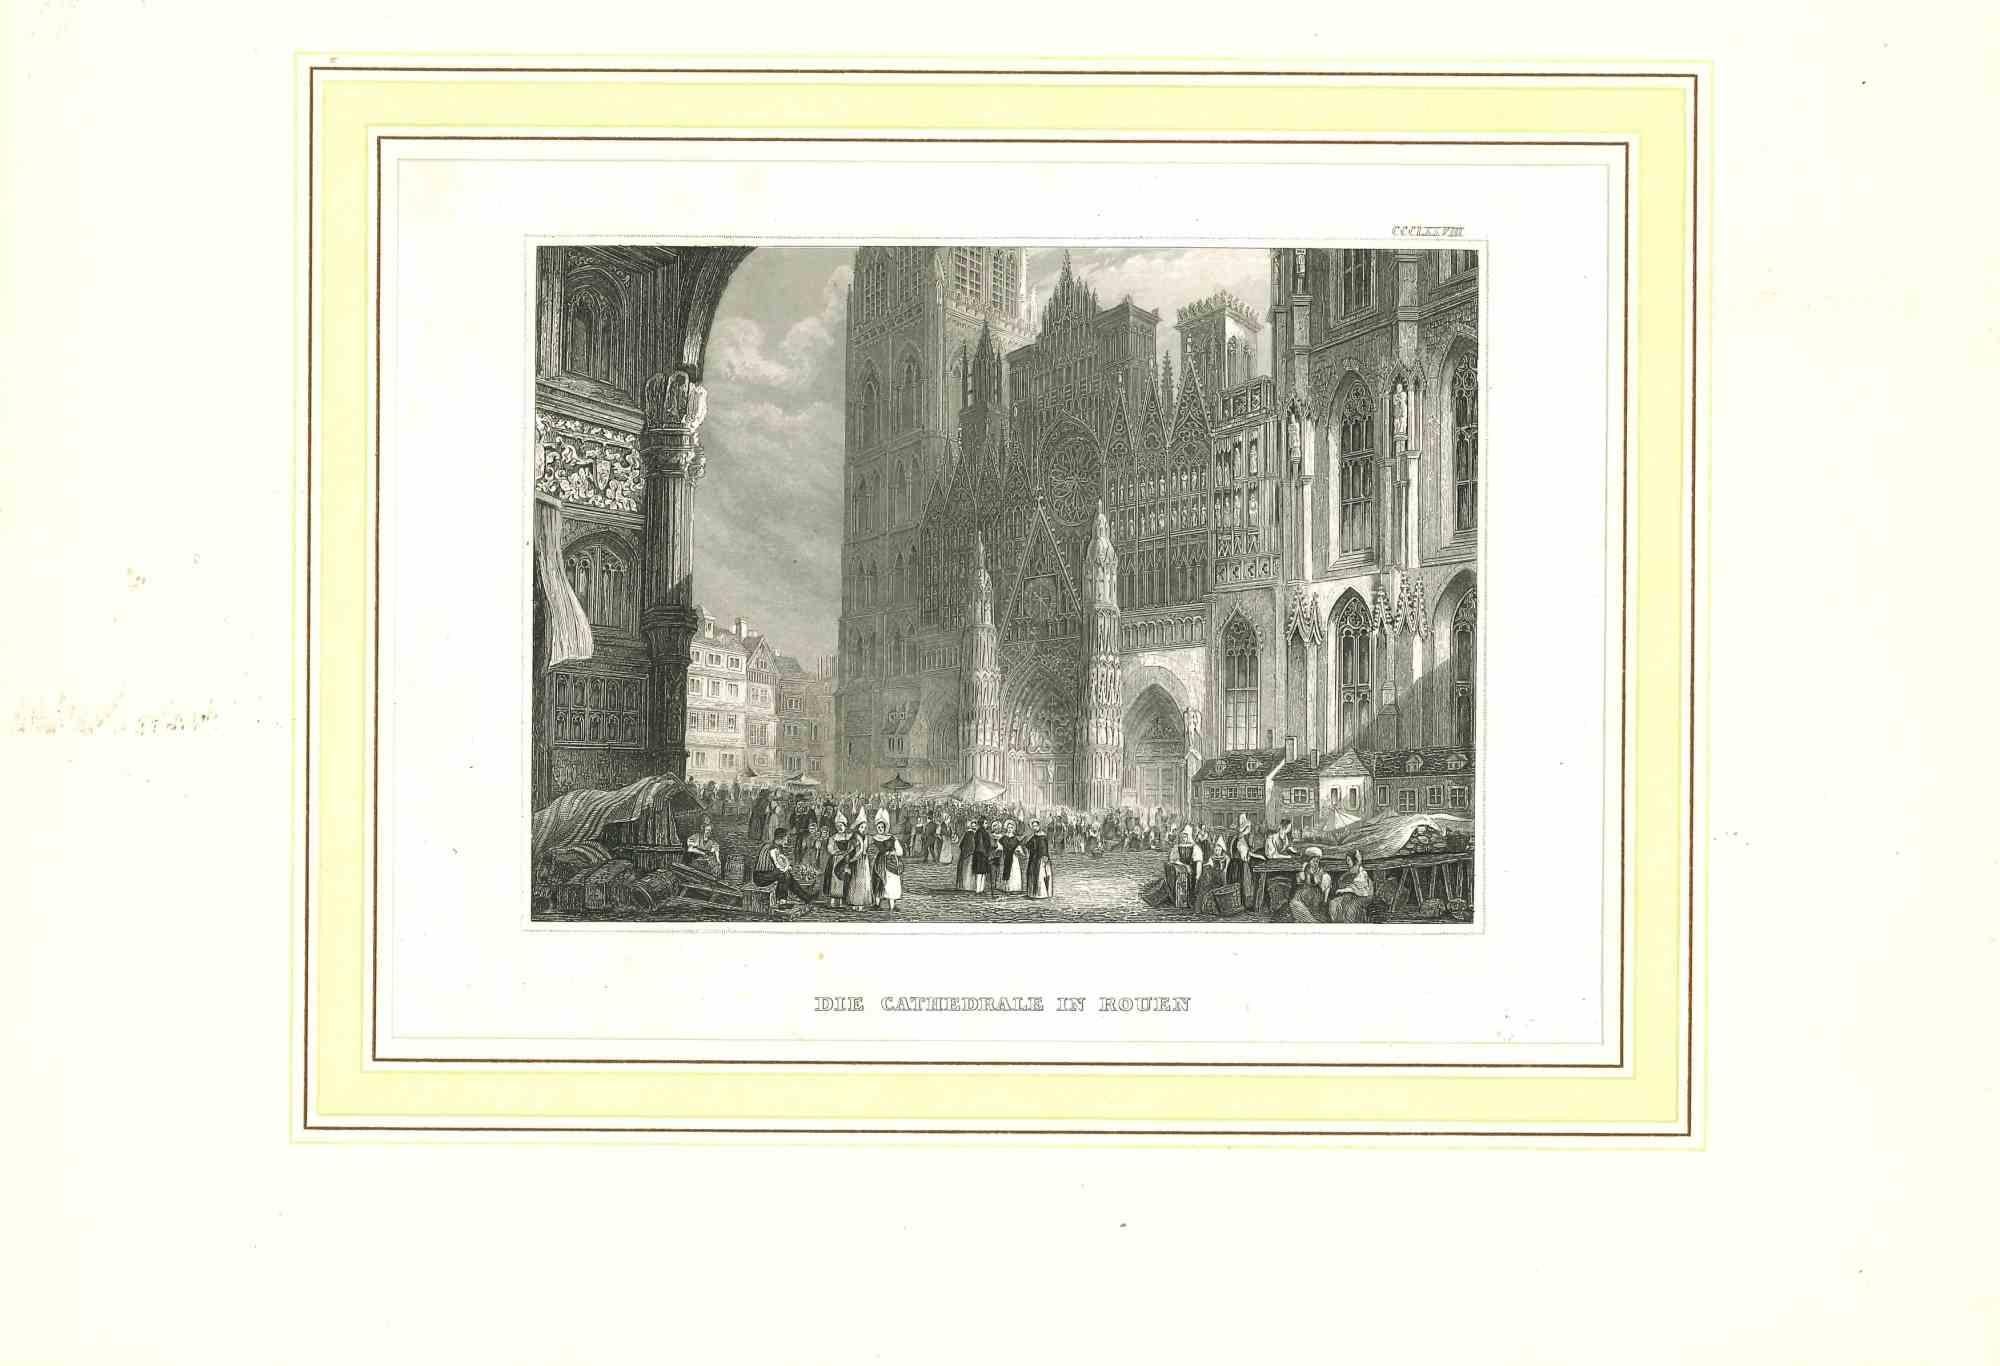 Unknown Figurative Print - Die Cathedrale in Rouen - Original Lithograph - Mid-19th Century